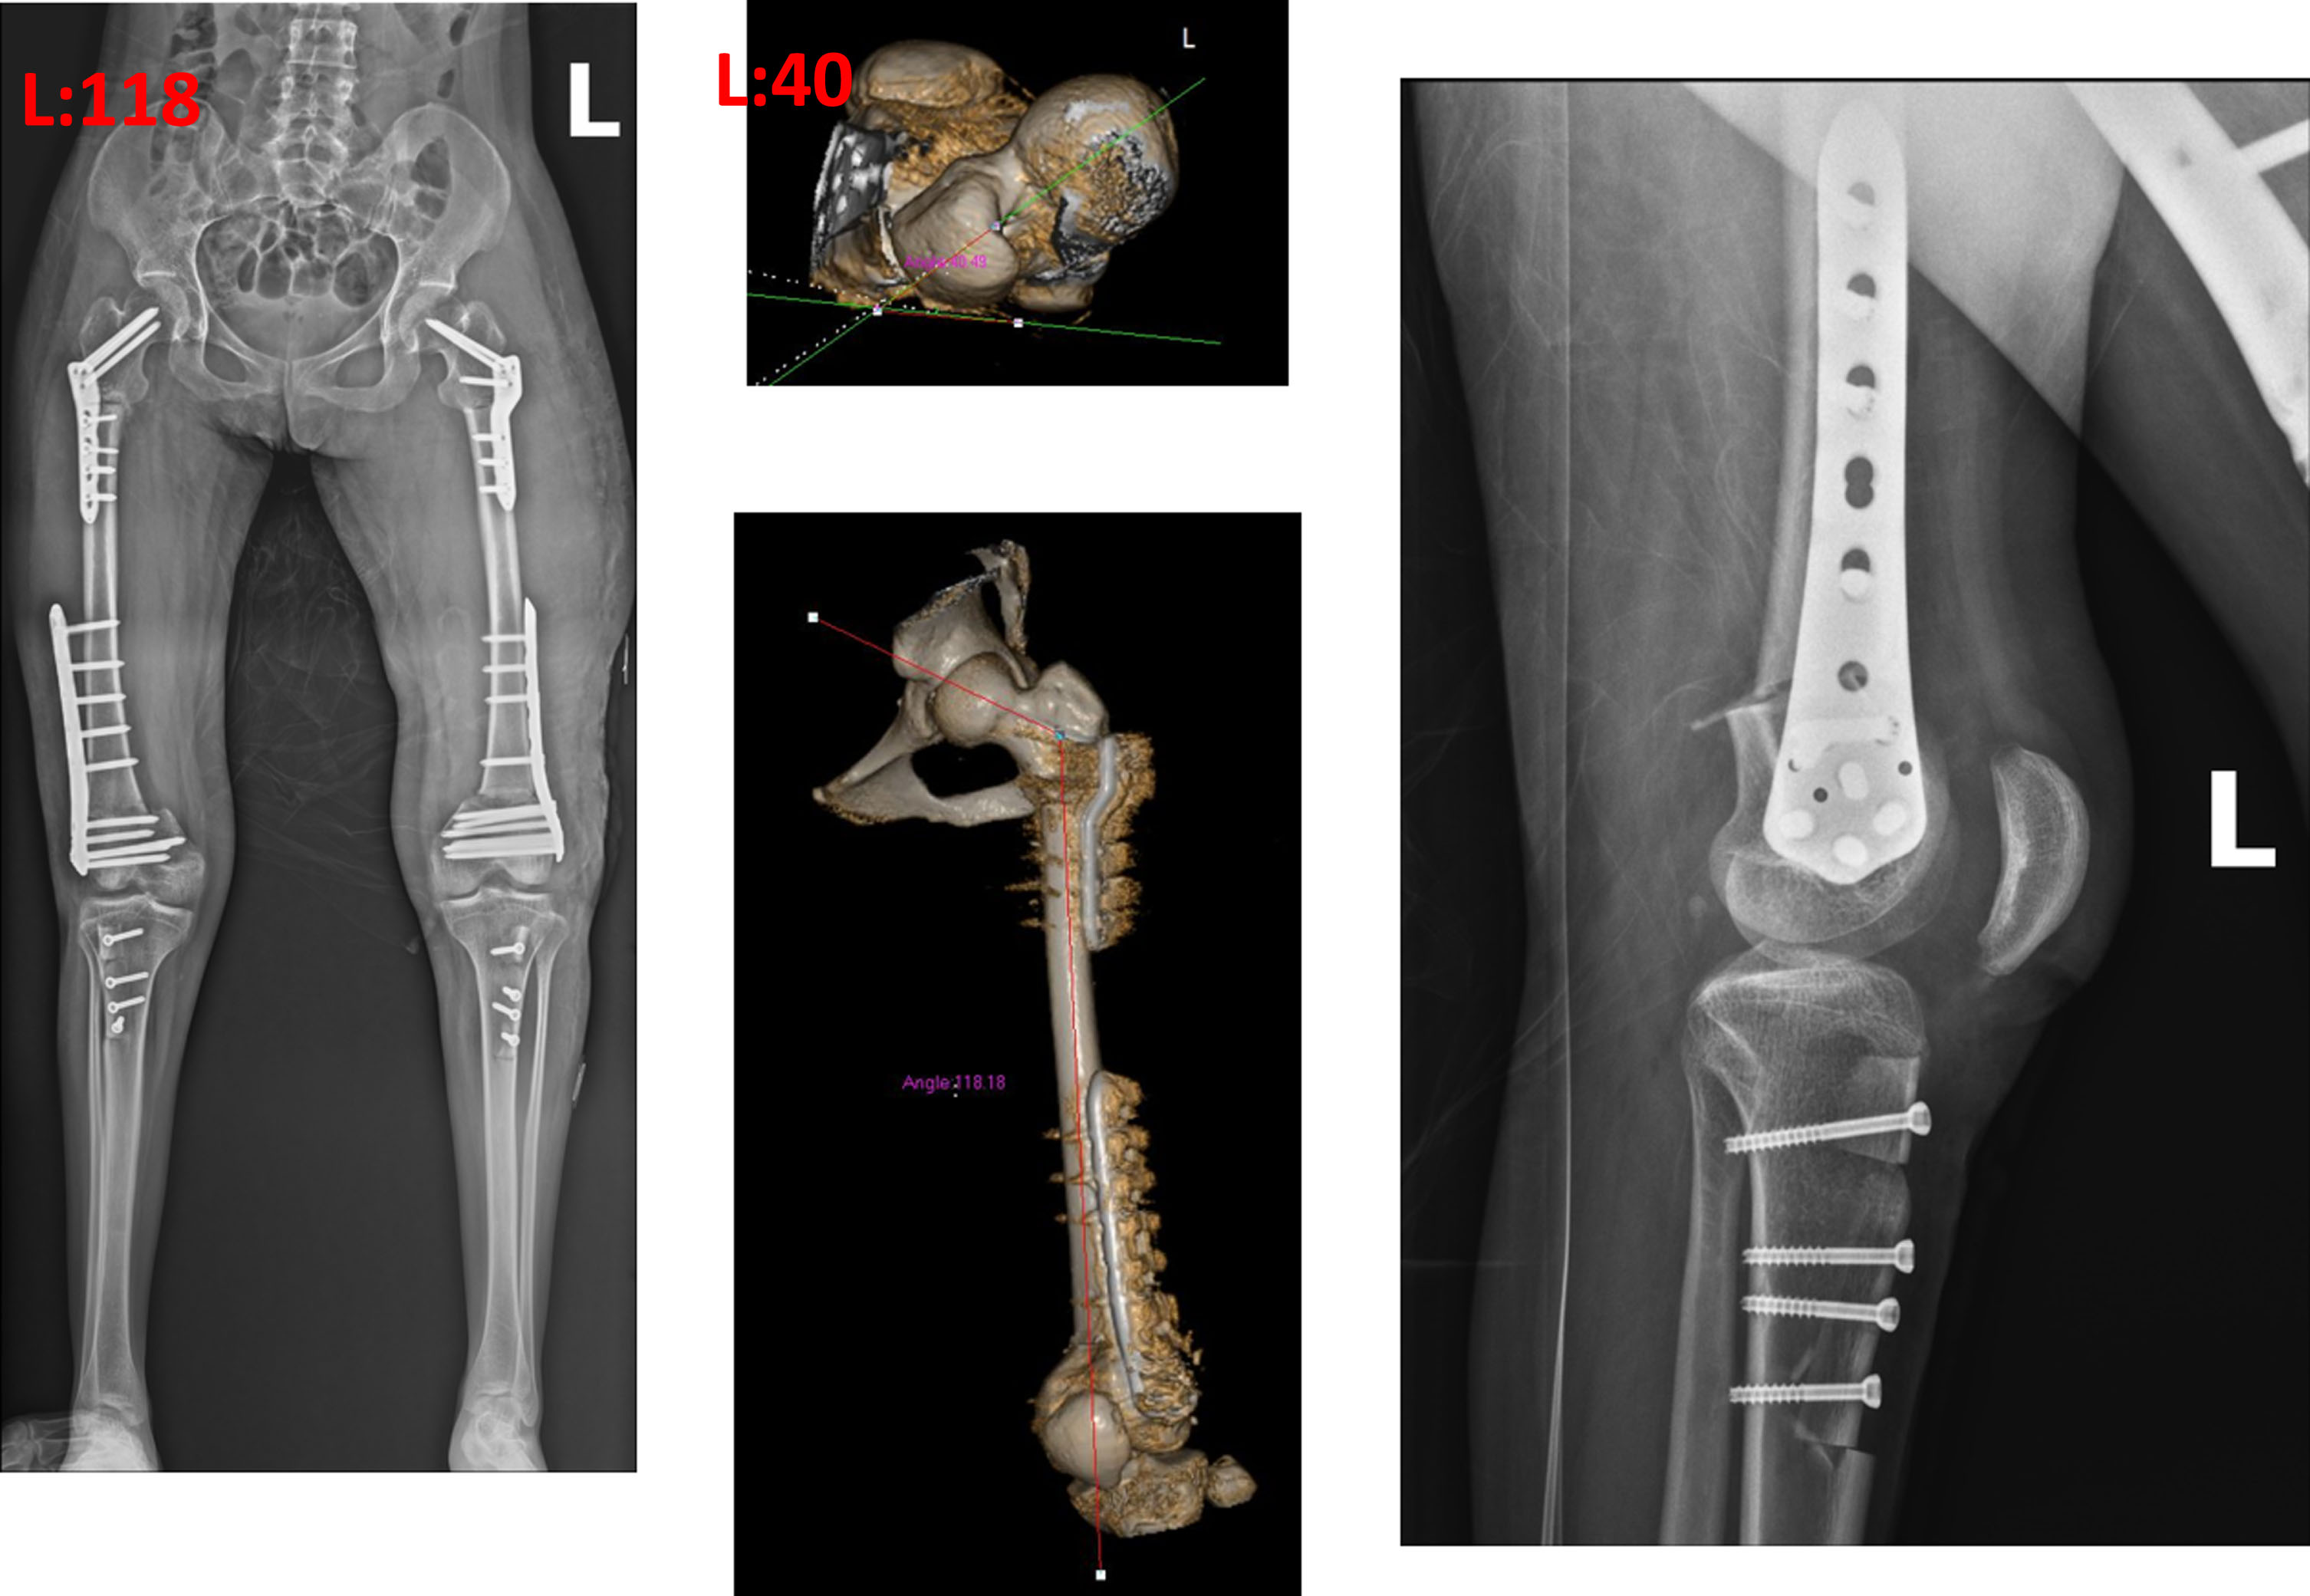 The left side was performed three months after the right with varus, extension, rotation osteotomy of the proximal femur, extension osteotomy of the distal femur, and advancement of the patella. The neck shaft angles of 131 were reduced to about 120 degrees. The anteversion was slightly increased to account for the external rotation of the limb.